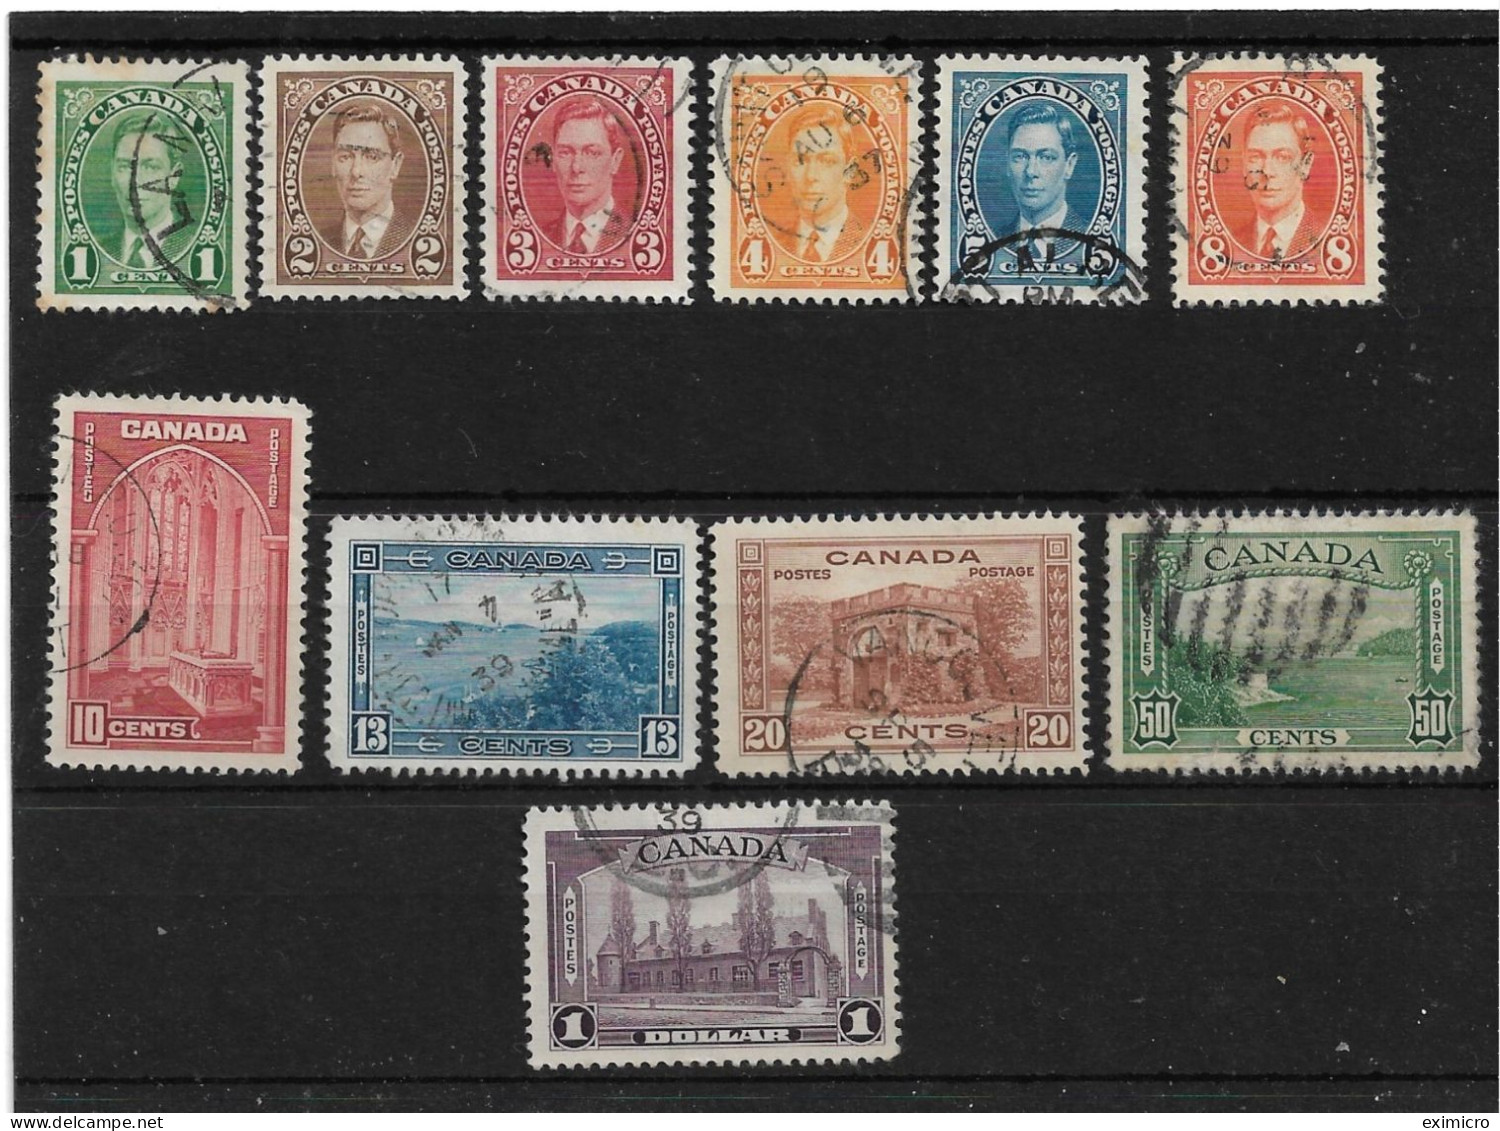 CANADA 1937 - 1938 SET SG 357/367 FINE USED Cat £40 - Used Stamps